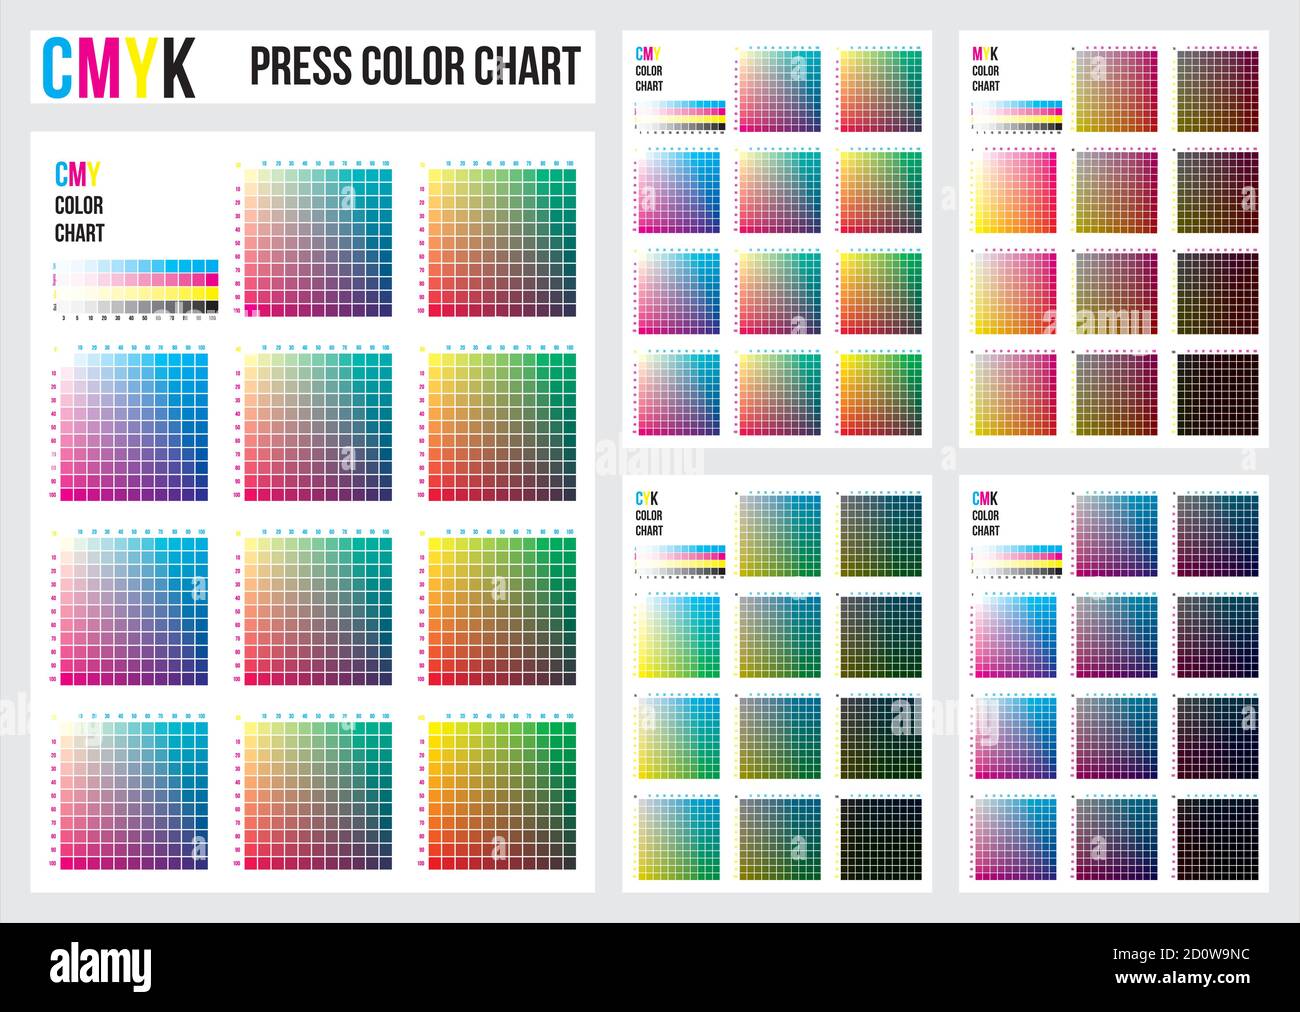 CMYK Press Color Chart. CMYK process printing match. Cyan, magenta, yellow, black are base colors and others has been created combining them Stock Vector